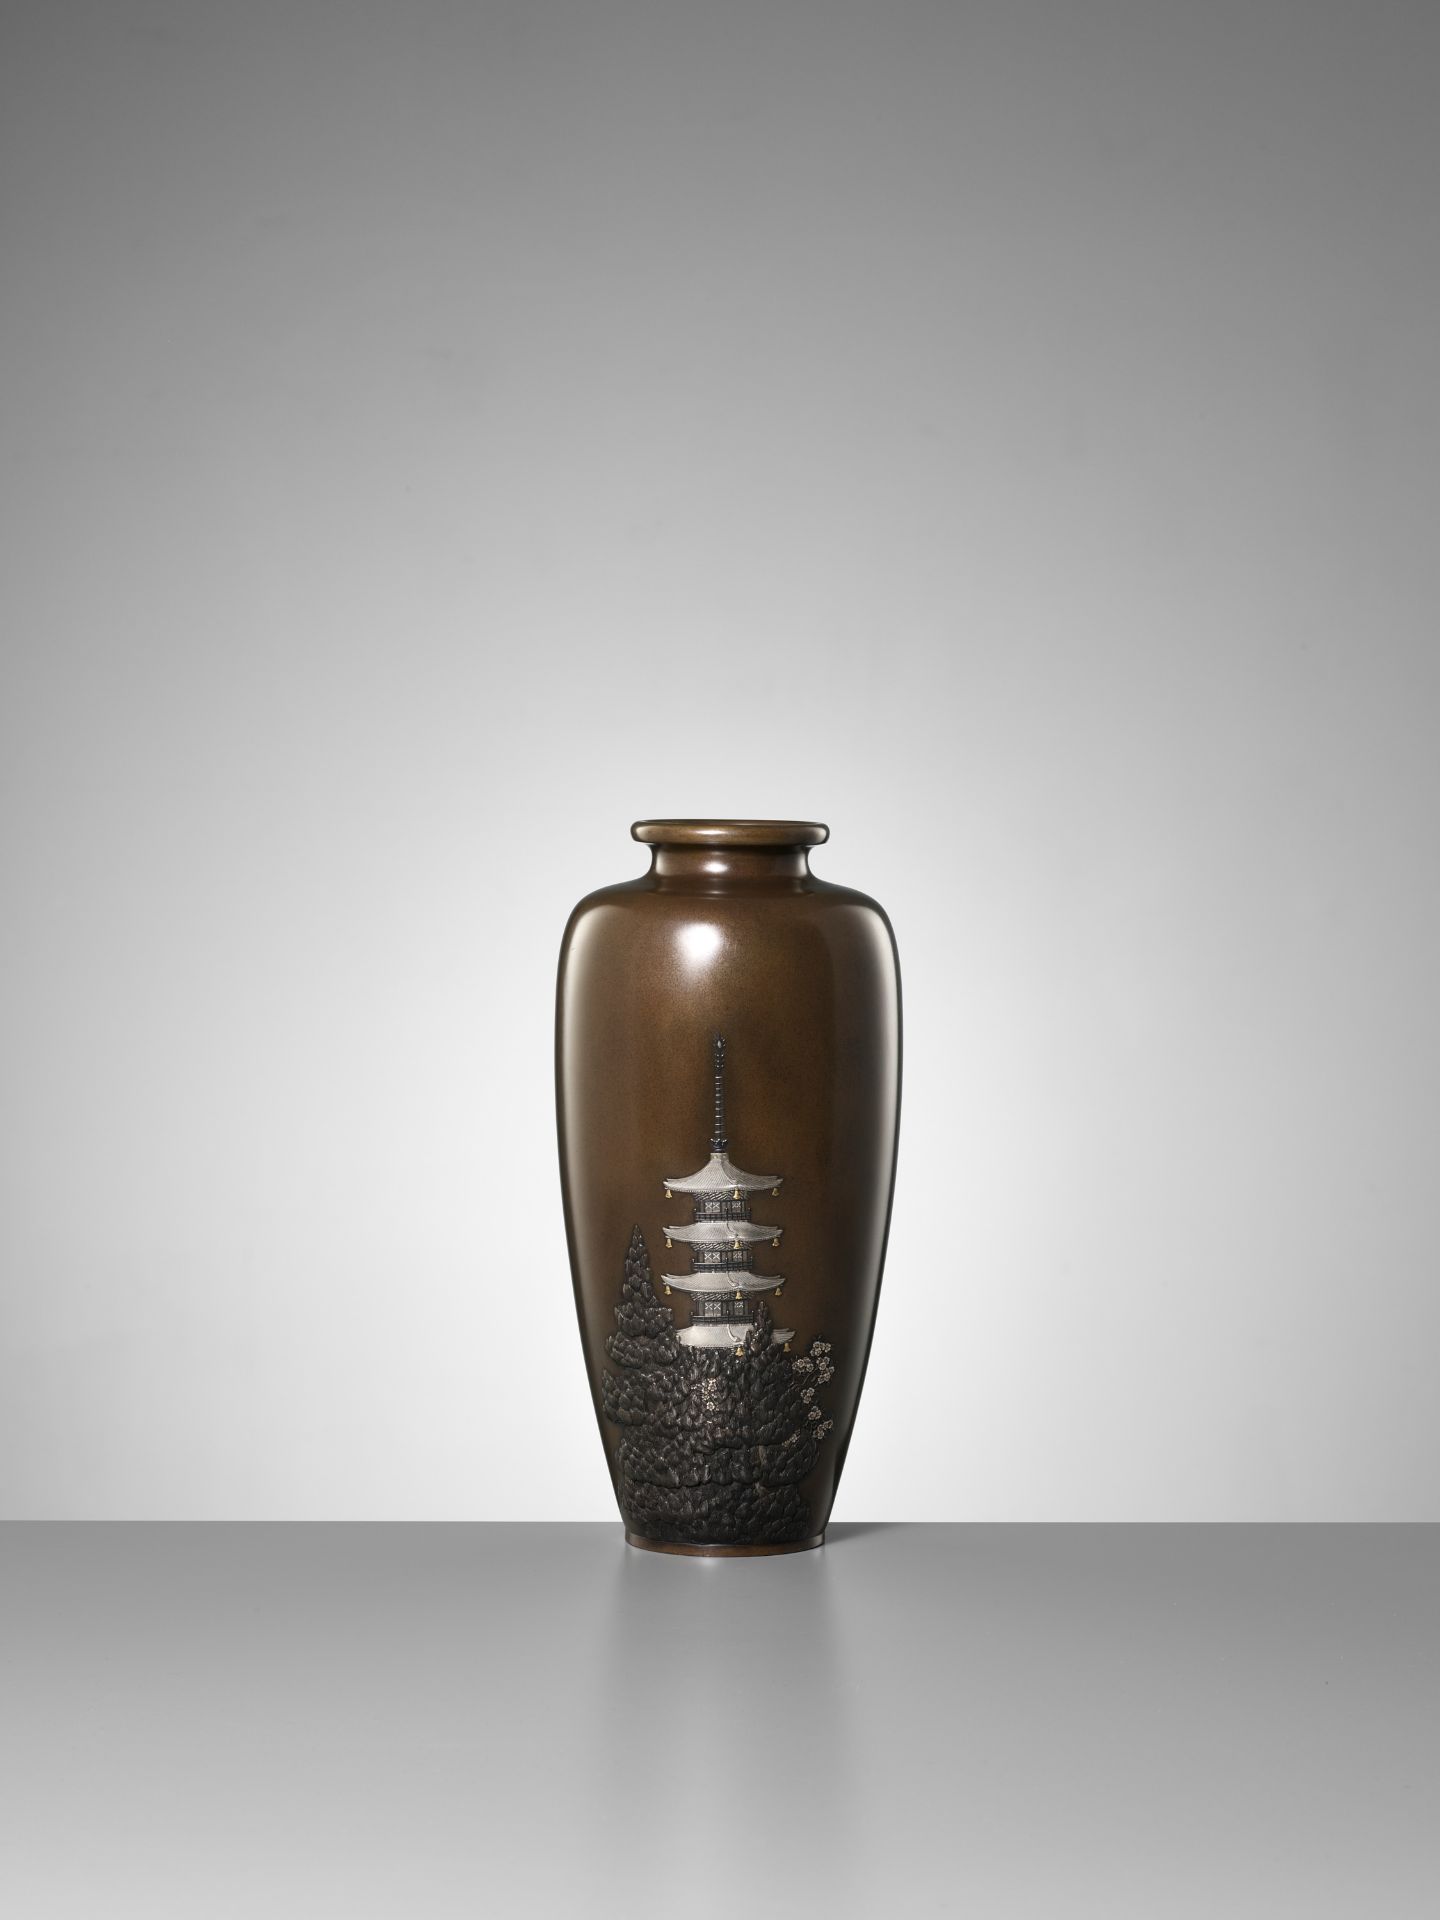 KOITSU FOR THE NOGAWA COMPANY: A LARGE INLAID BRONZE VASE DEPICTING A GOJUNOTO PAGODA IN SPRING - Image 2 of 12